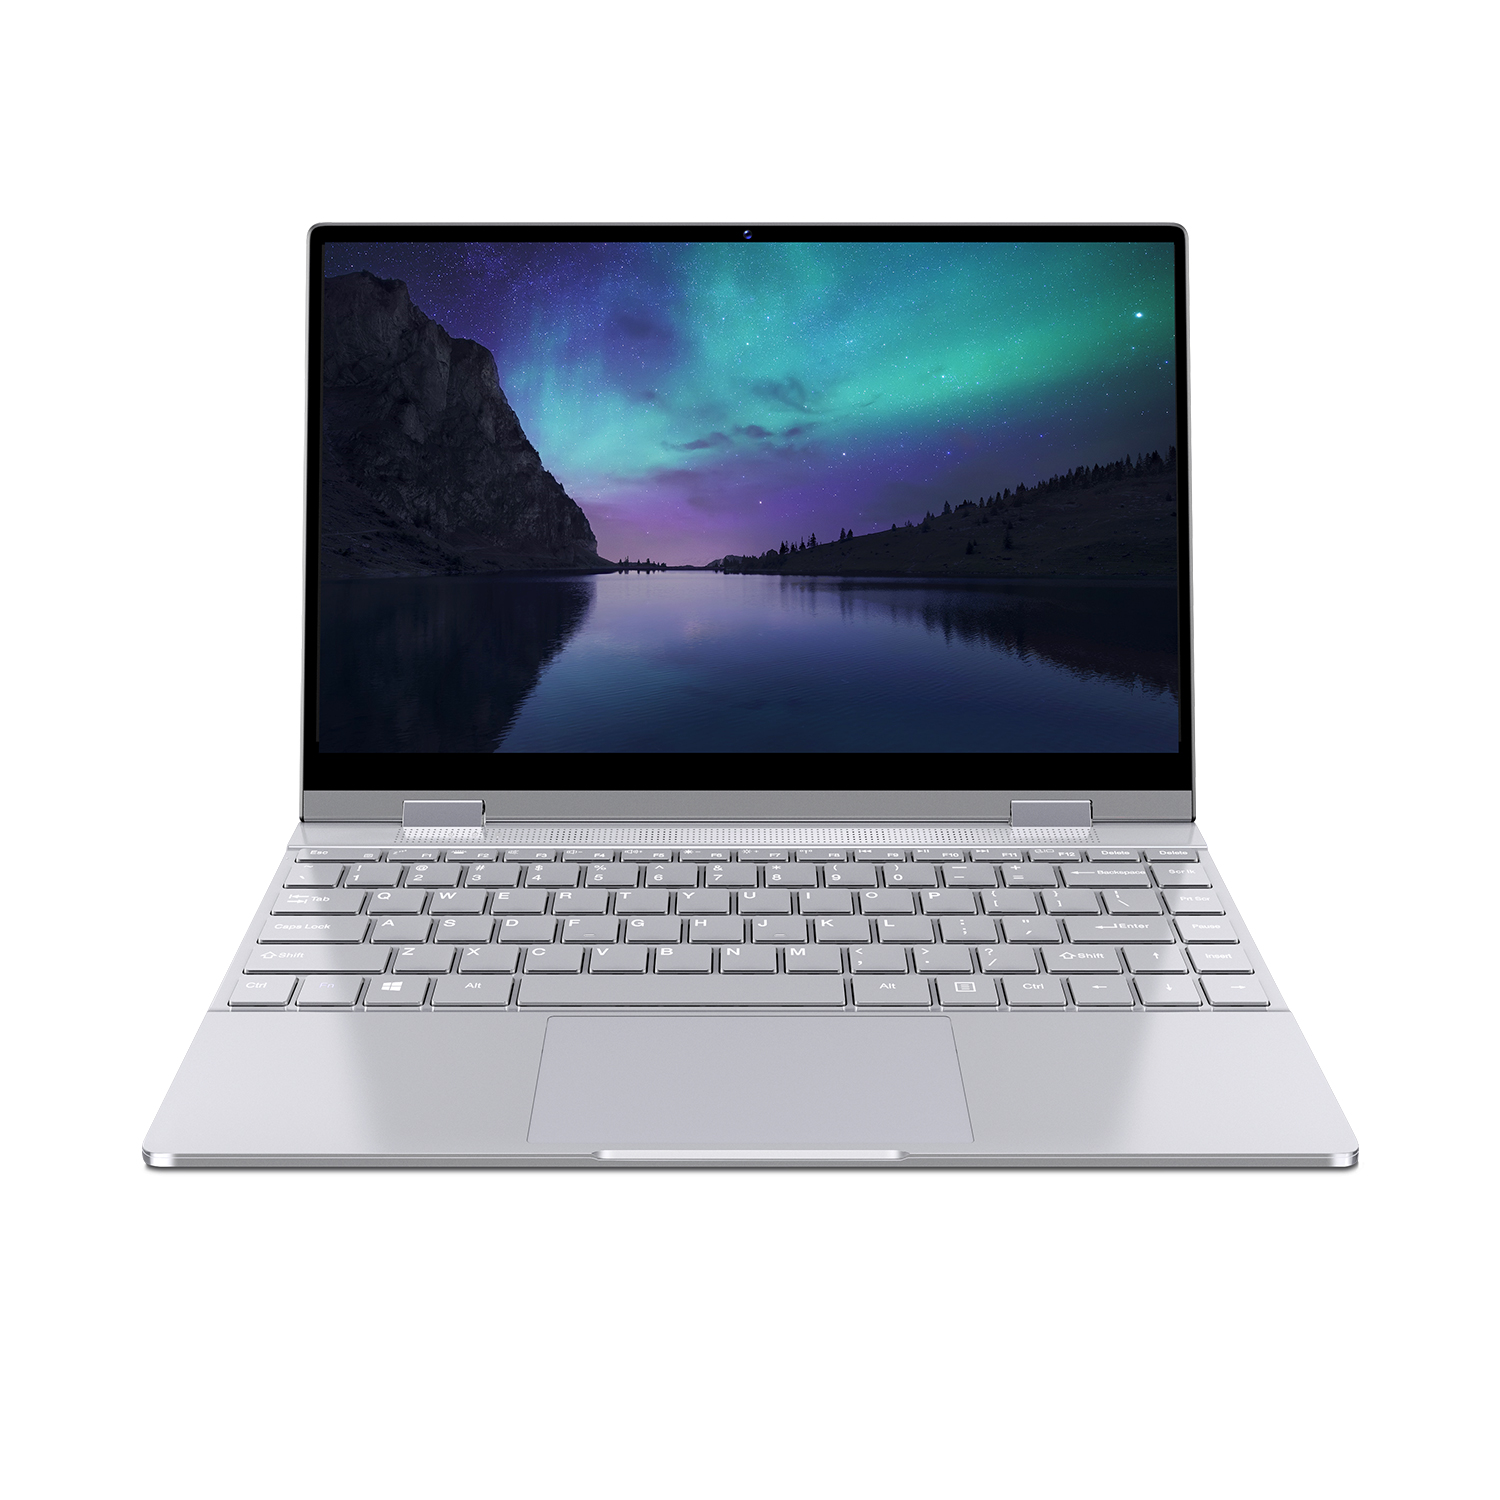 Find BMAX Y13 Laptop 13 3 inch 360 degree Touchscreen Intel N4120 8GB 256GB SSD 5mm Narrow Bezel Backlight Notebook for Sale on Gipsybee.com with cryptocurrencies